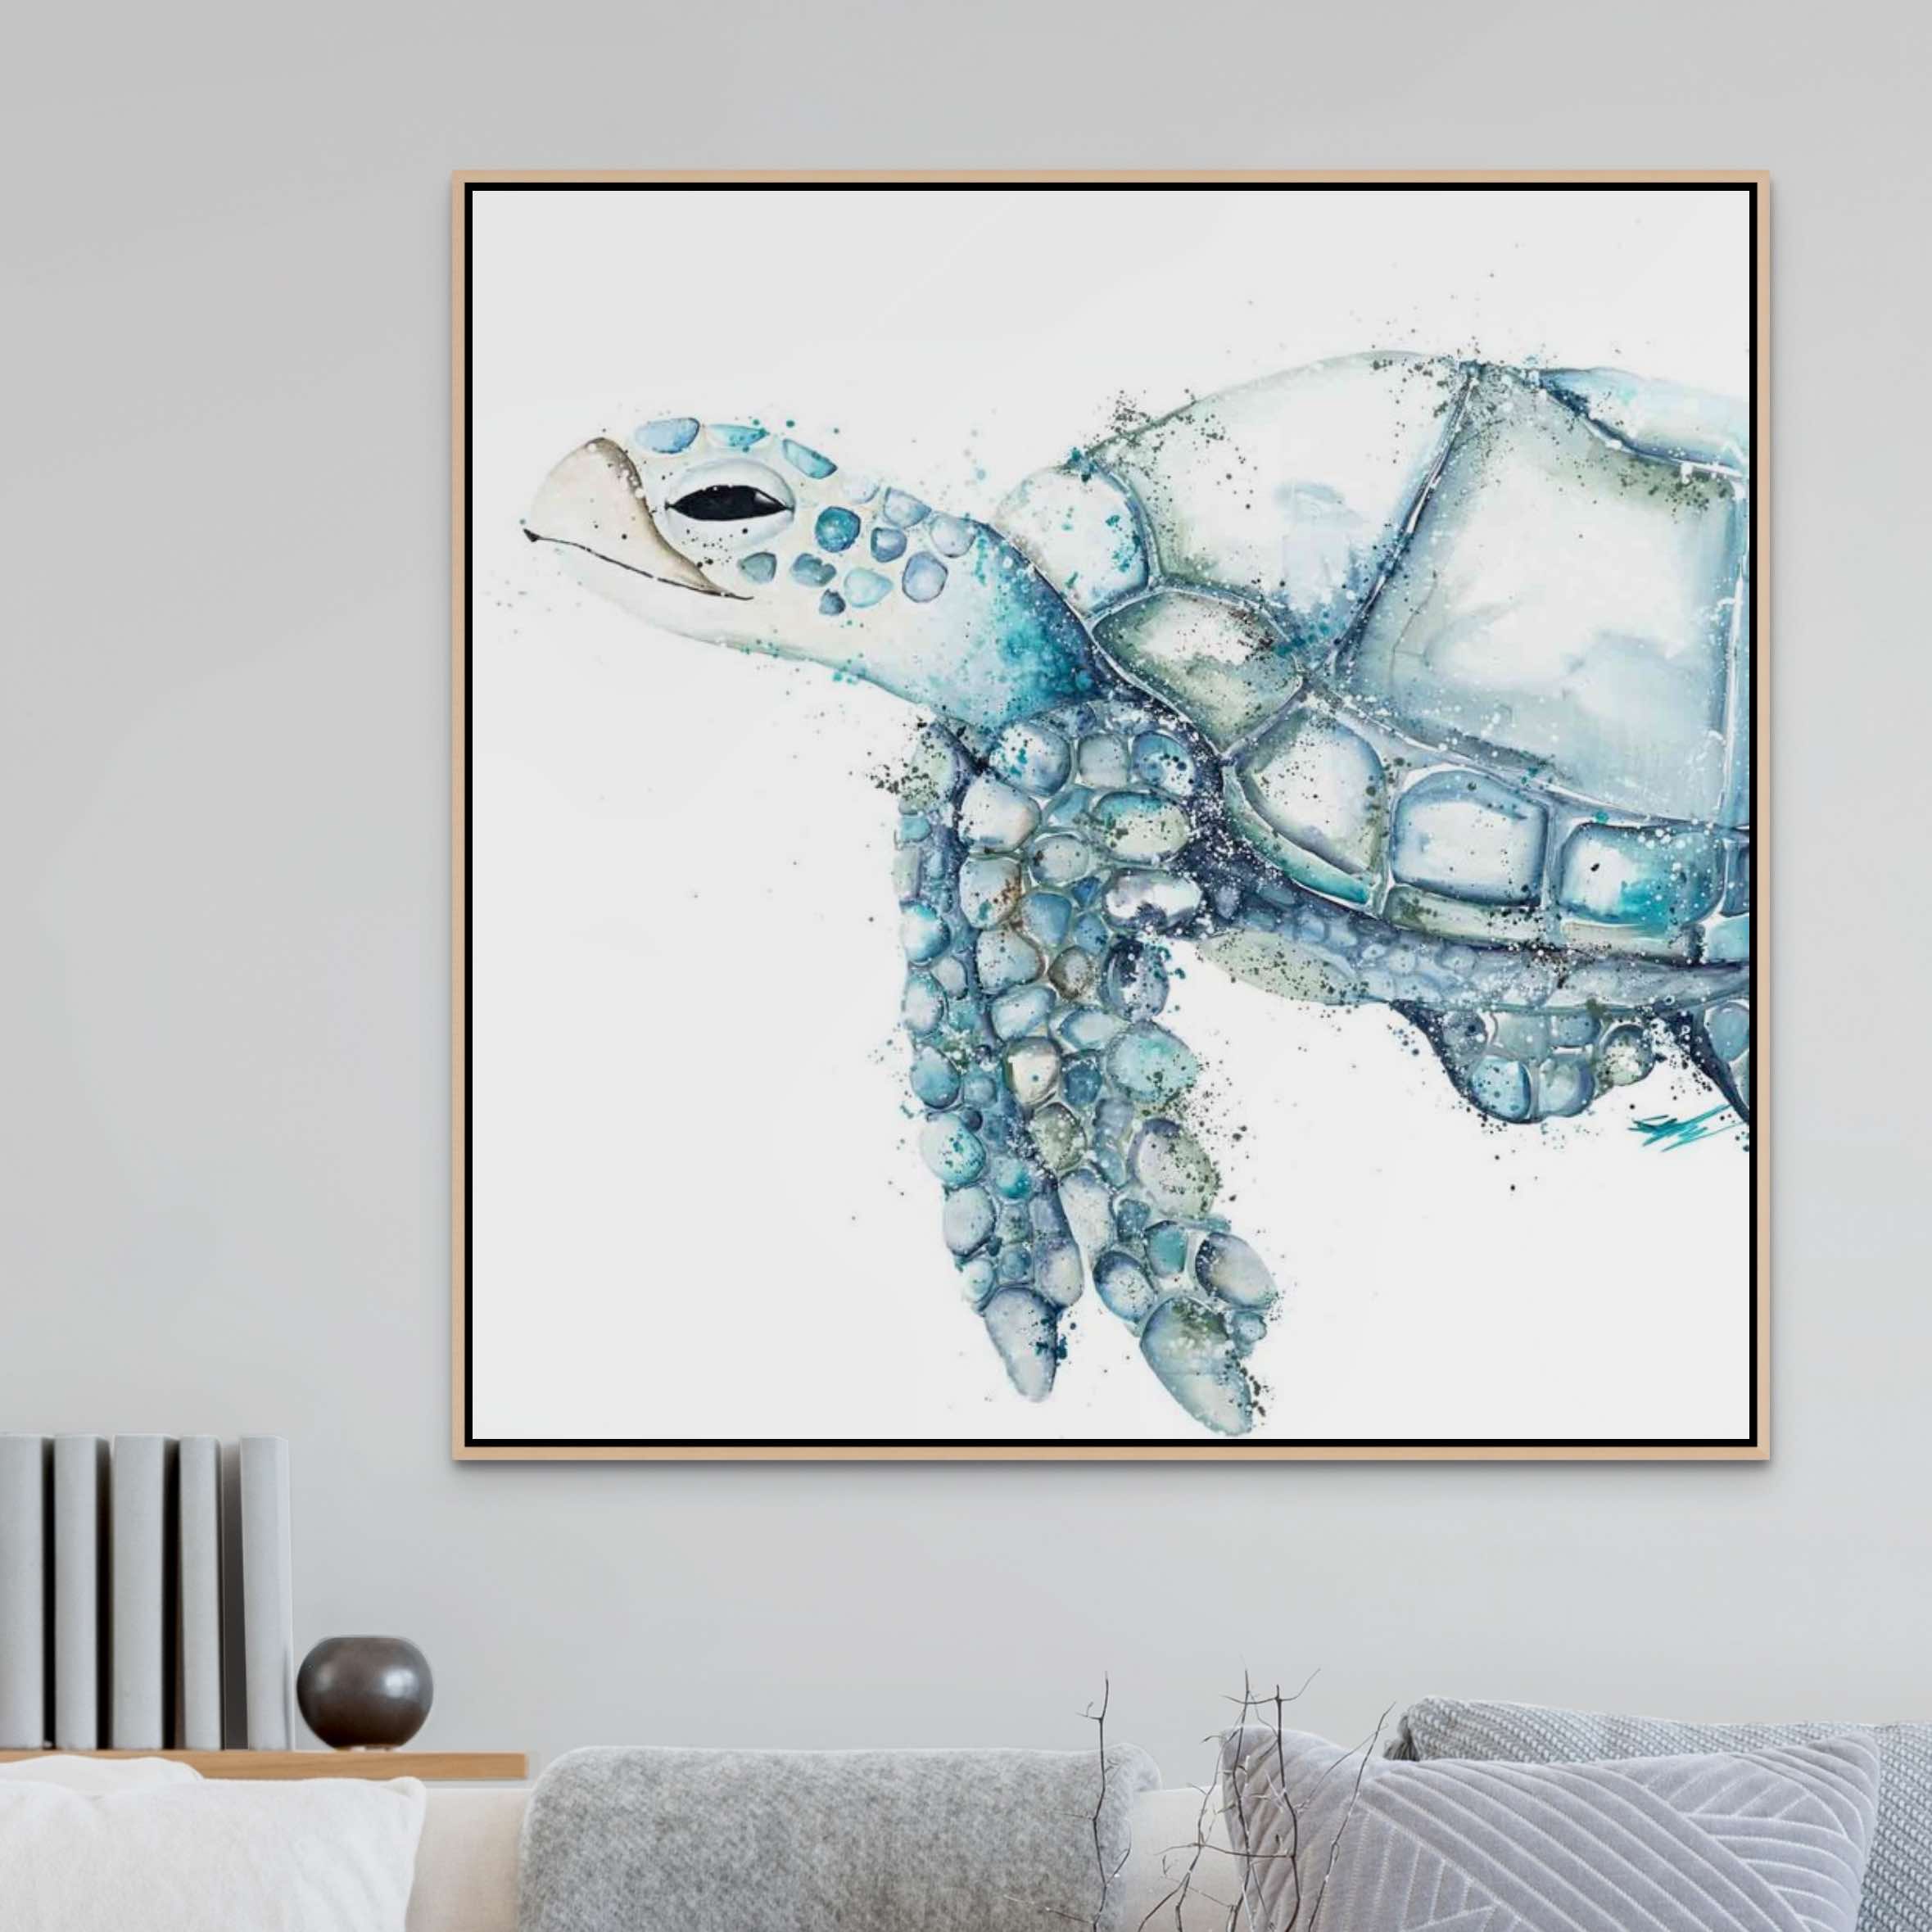 framed square canvas print of turtle hanging on wall 1